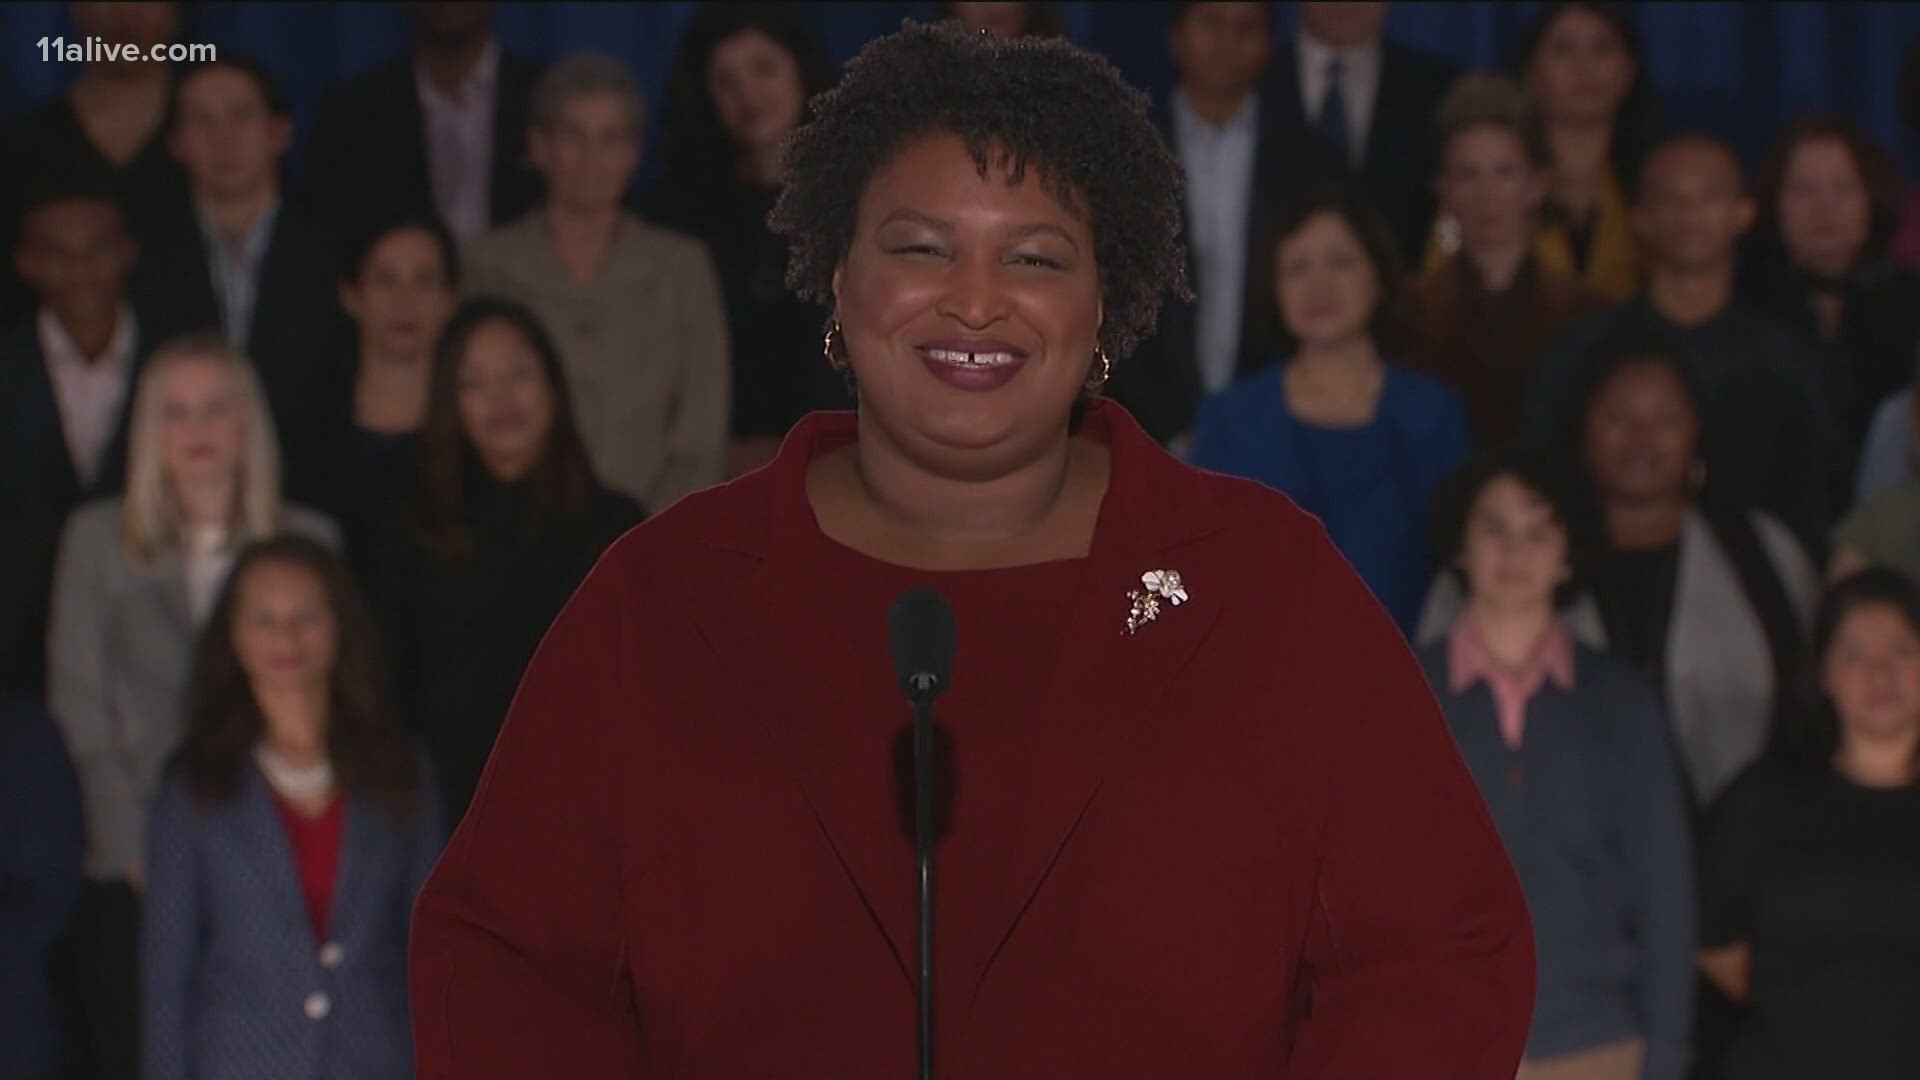 Georgia Democrat Stacey Abrams is calling on Congress to pass additional COVID-19 relief for Americans.